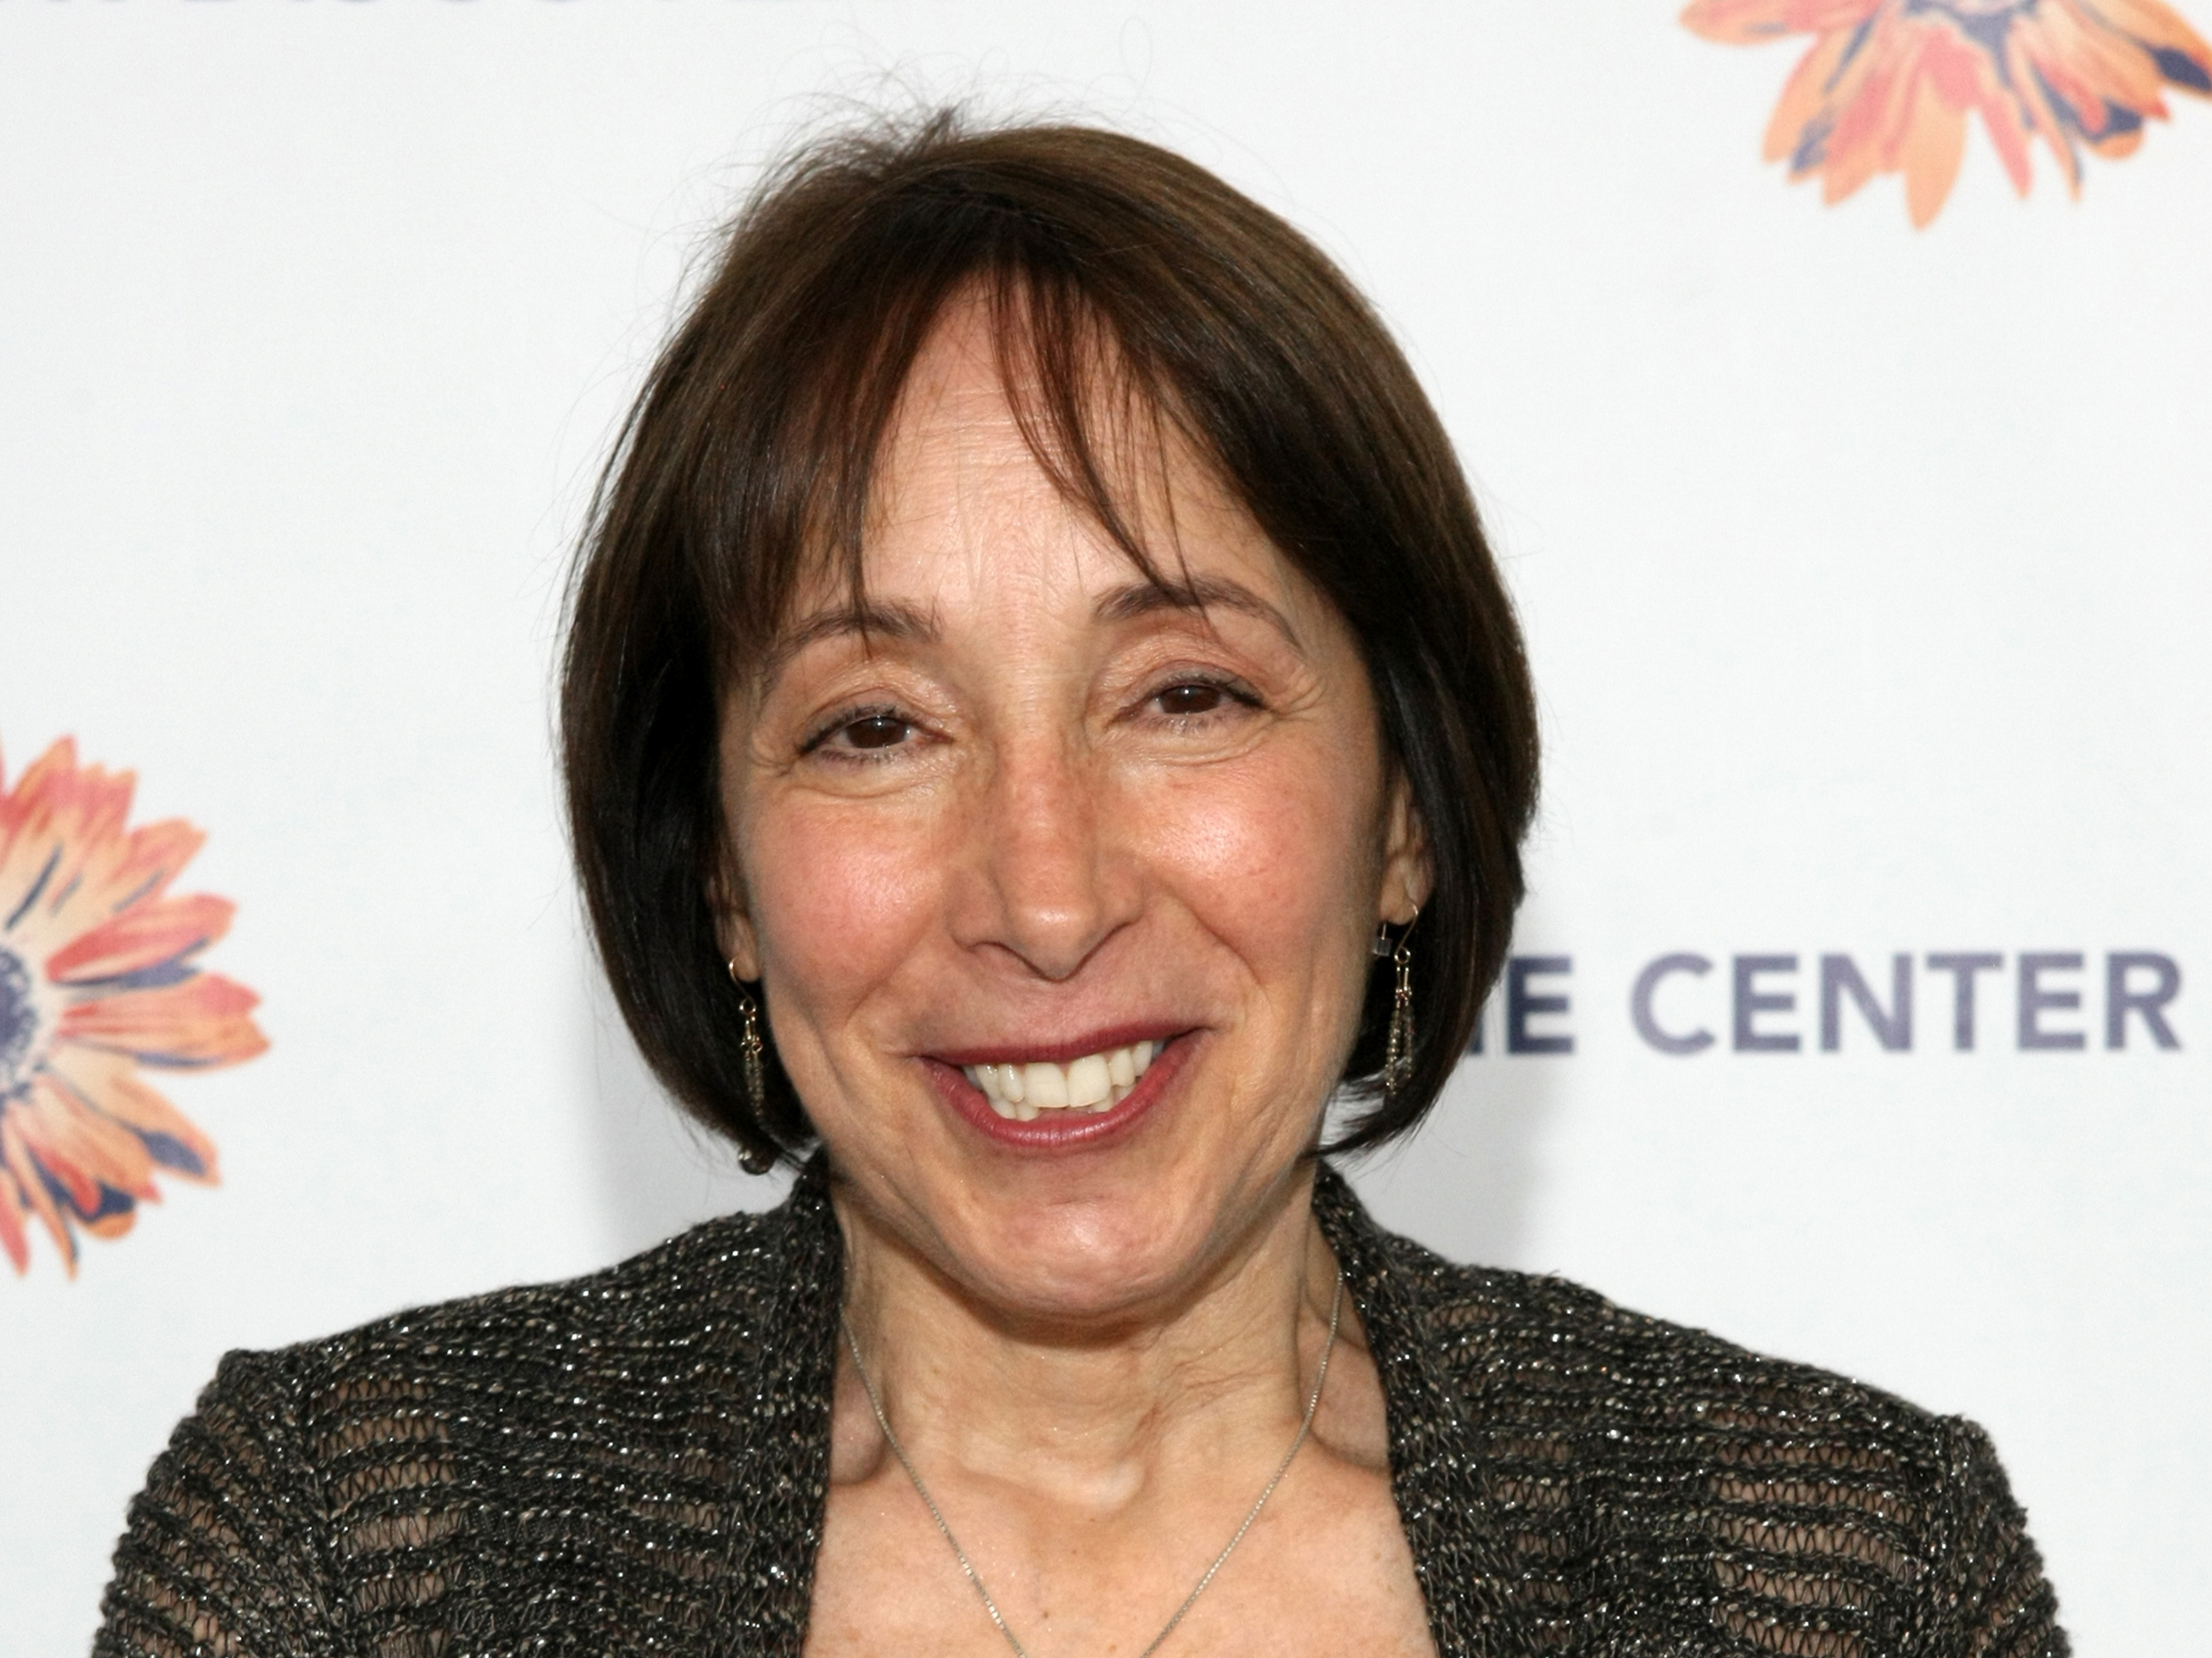 Actress Didi Conn attends the "Evening Of Discovery" Gala at Pier Sixty at Chelsea Piers on May 15, 2012 in New York City. (Getty Images)